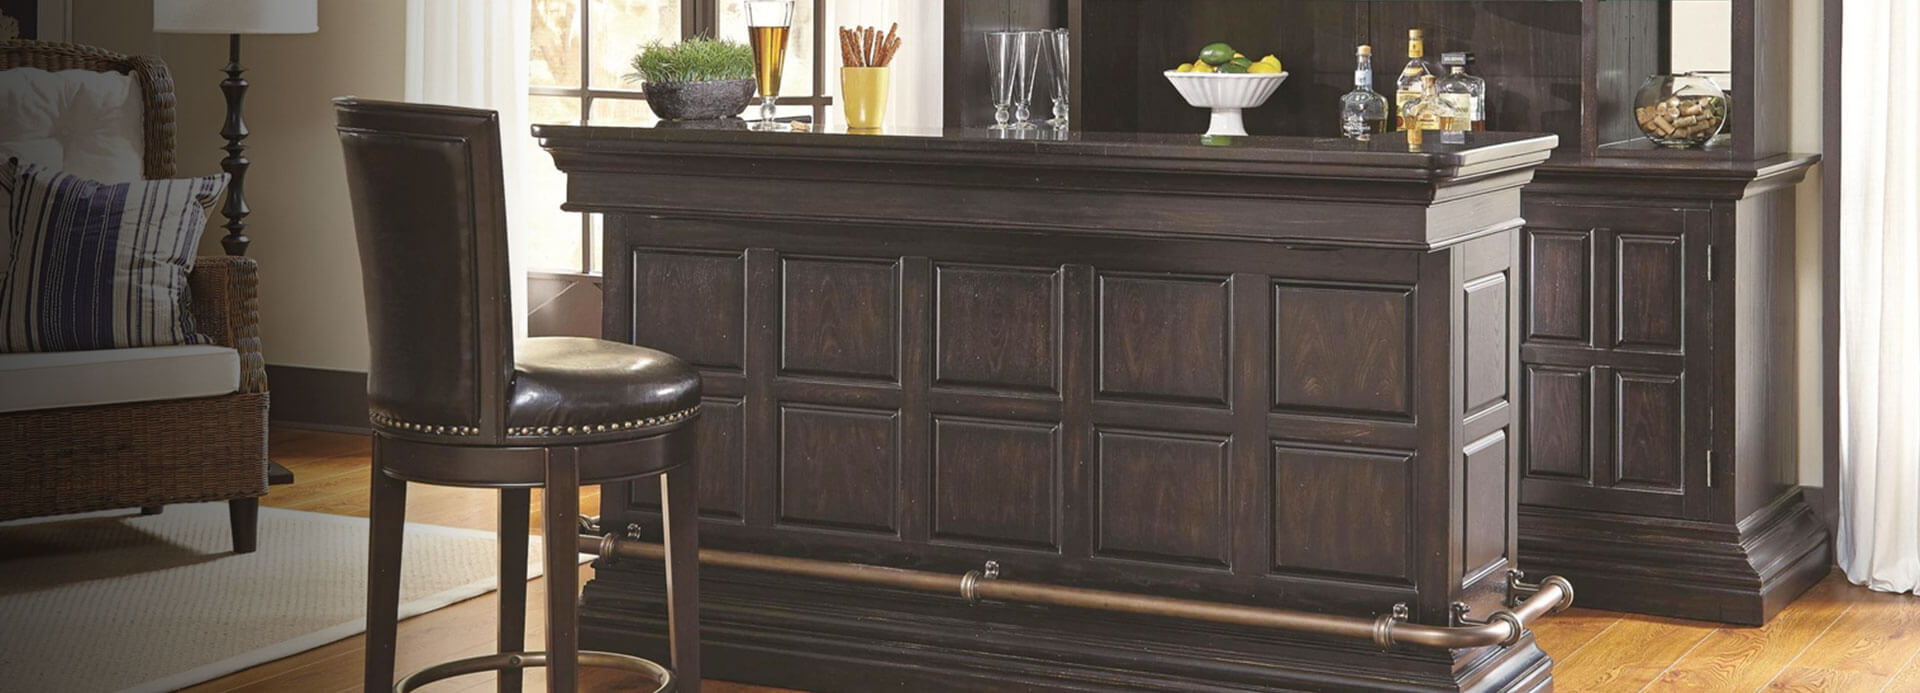 Tips for Buying Home Bars